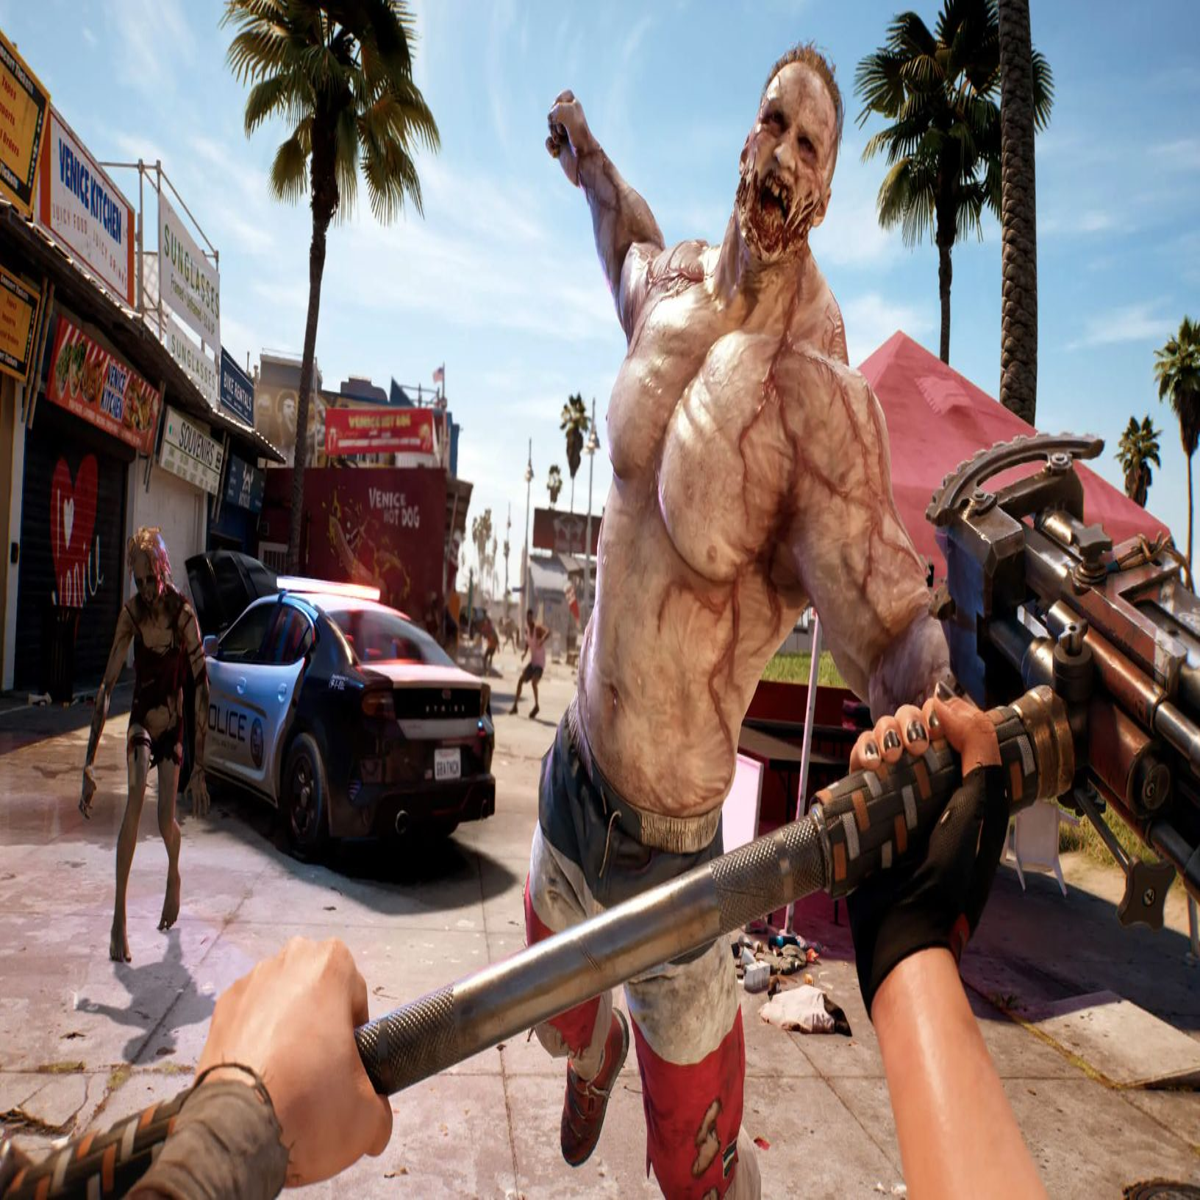 Dead Island 2 - Haus system requirements